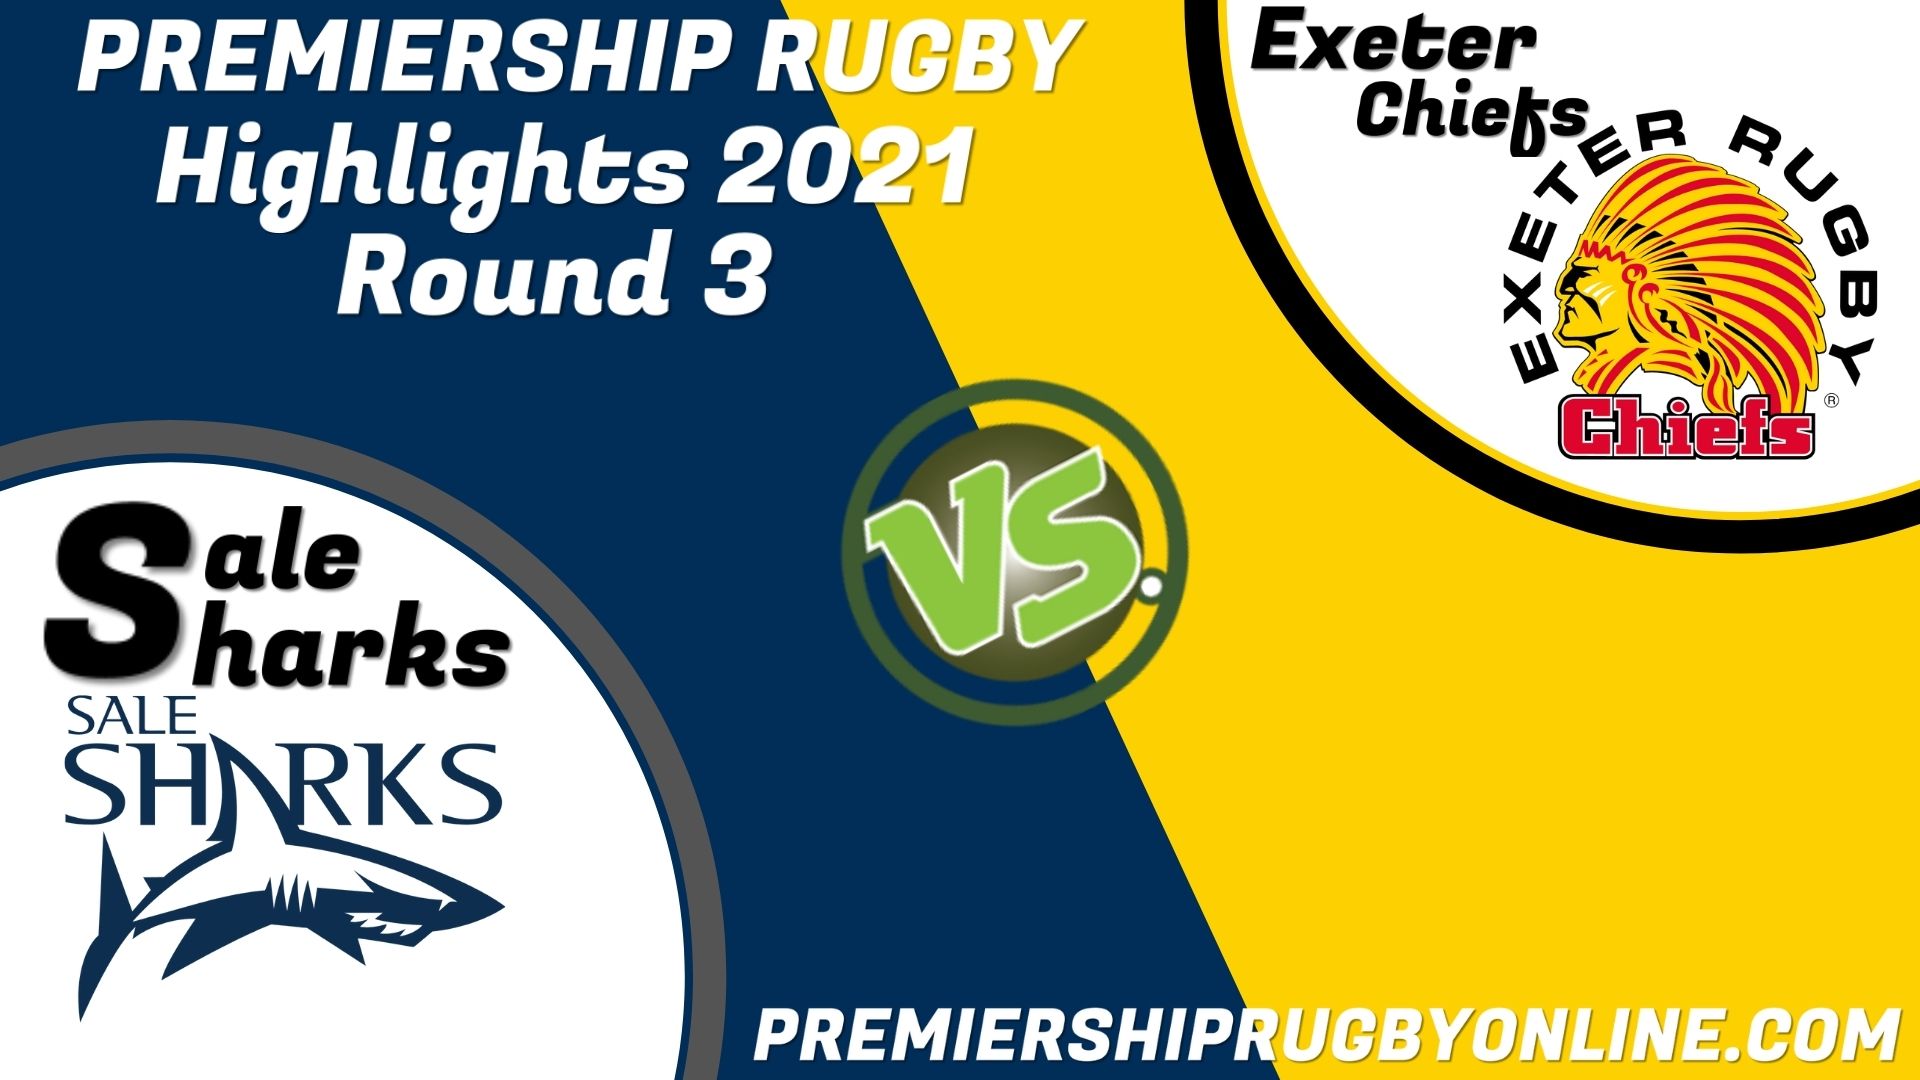 Sale Sharks Vs Exeter Chiefs Highlights 2021 RD 3